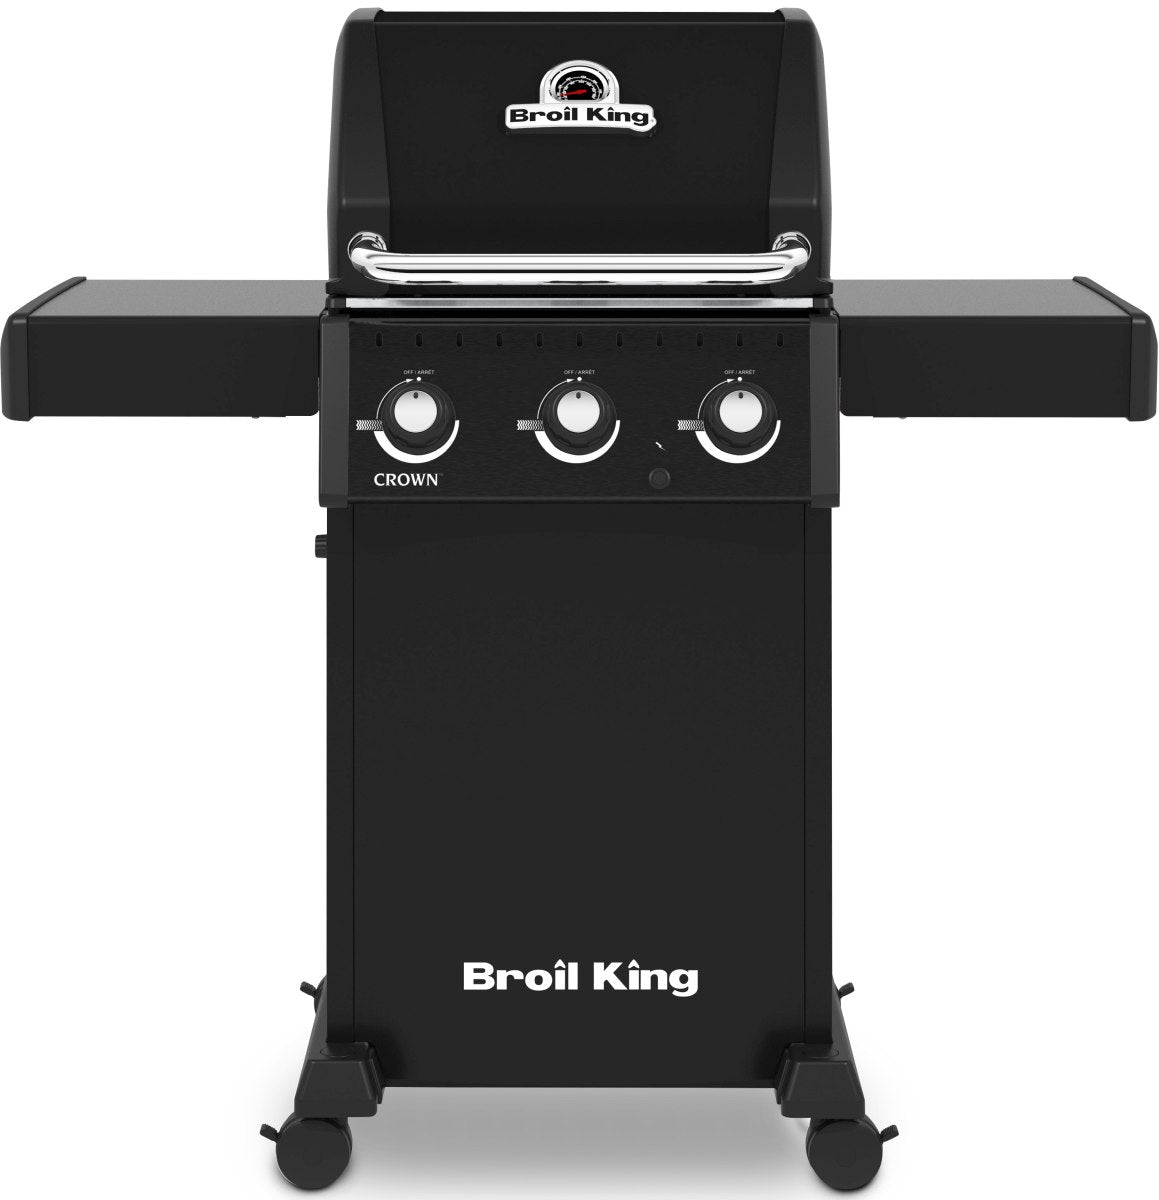 Broil King® Crown 310 Black Freestanding Gas Grill